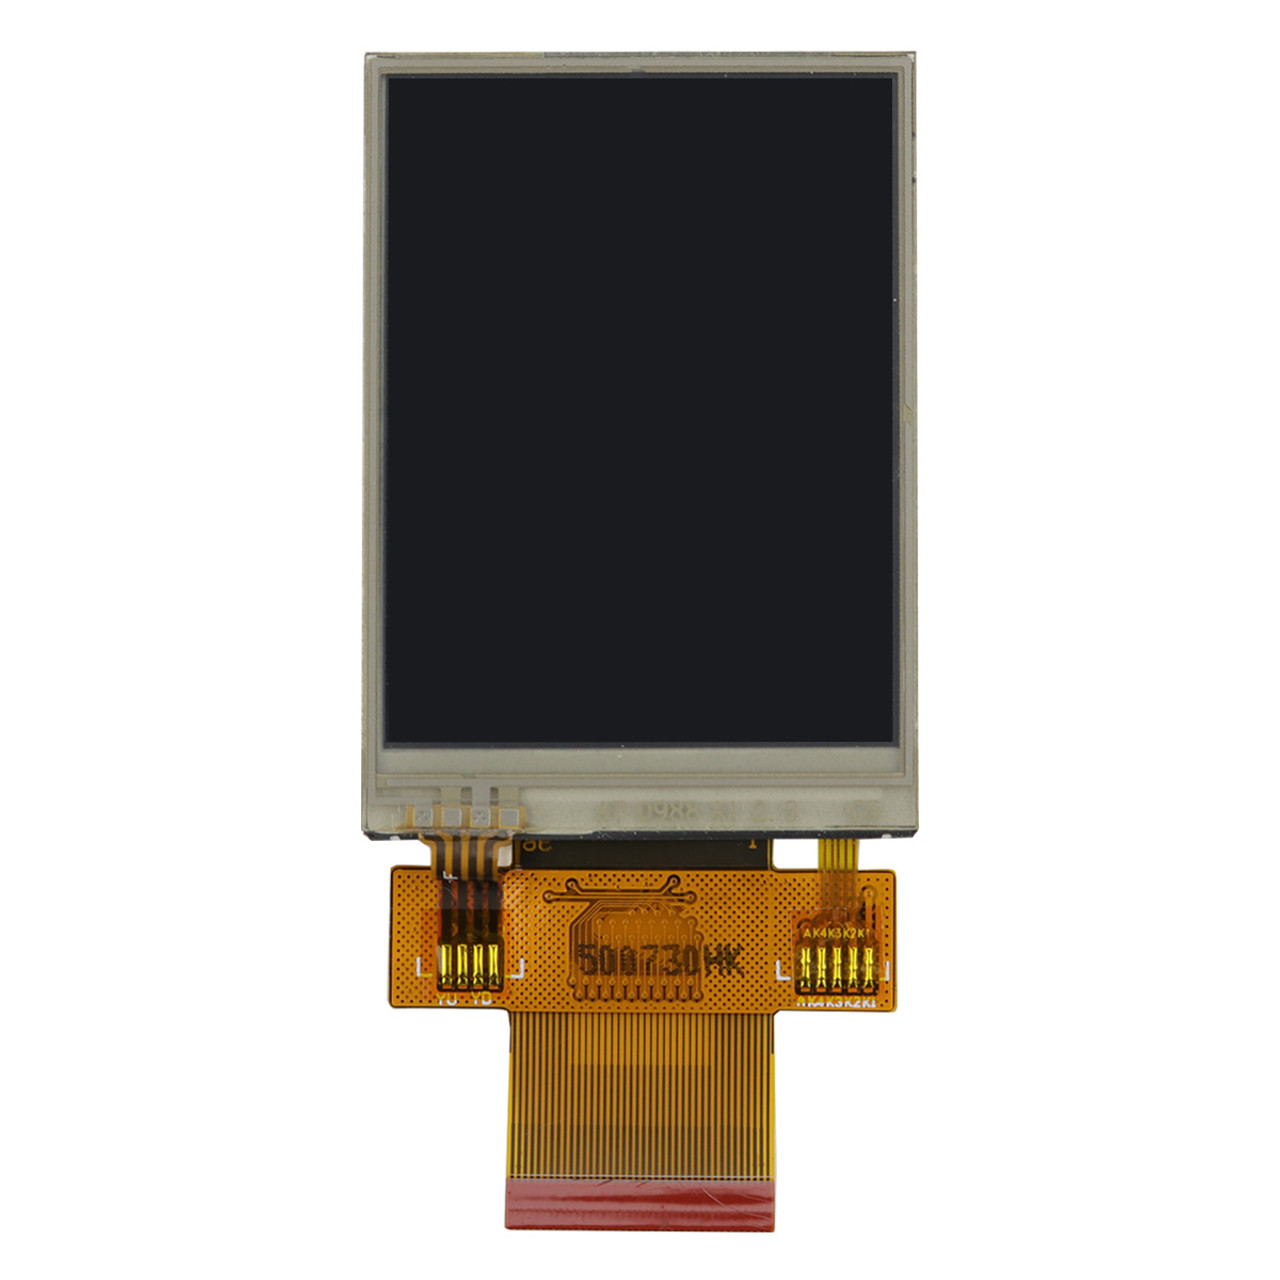 2.4 inch Sunlight Readable Resistive TFT Display